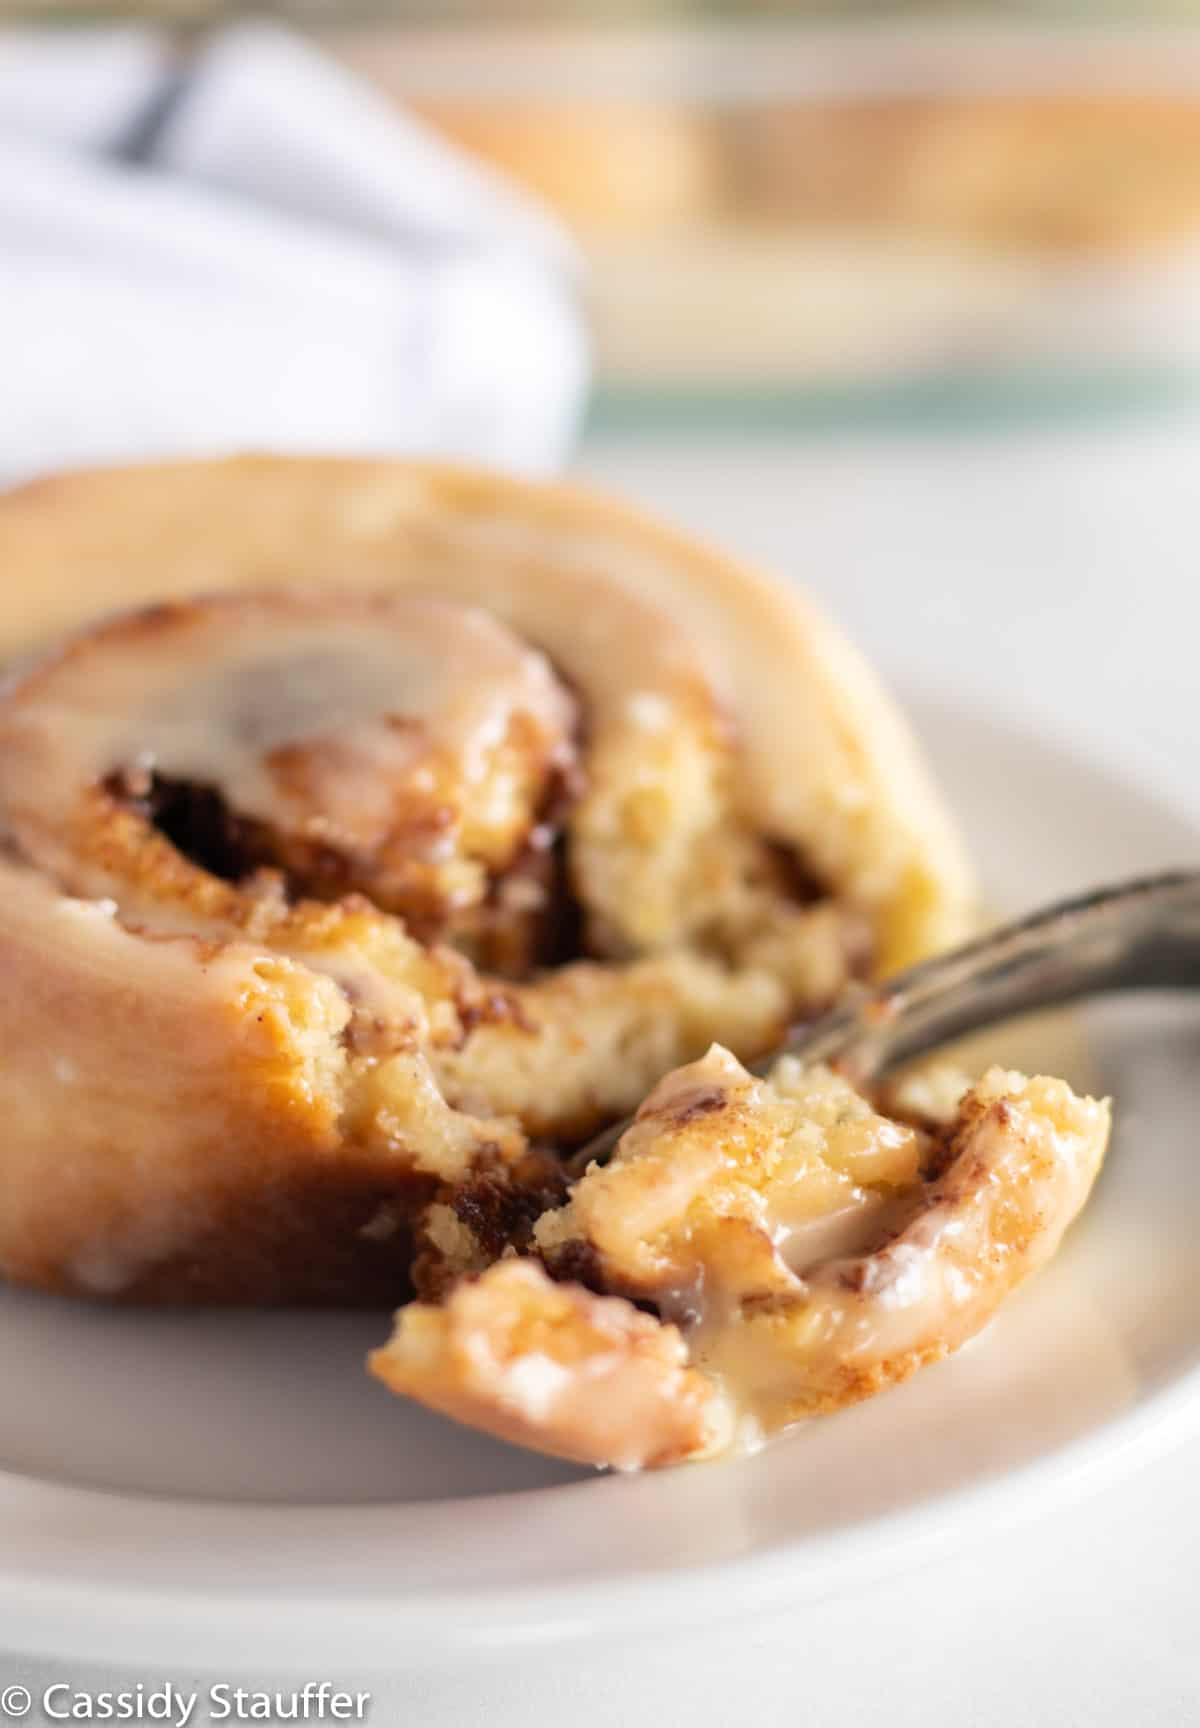 A serving of cinnamon rolls on a white plate.